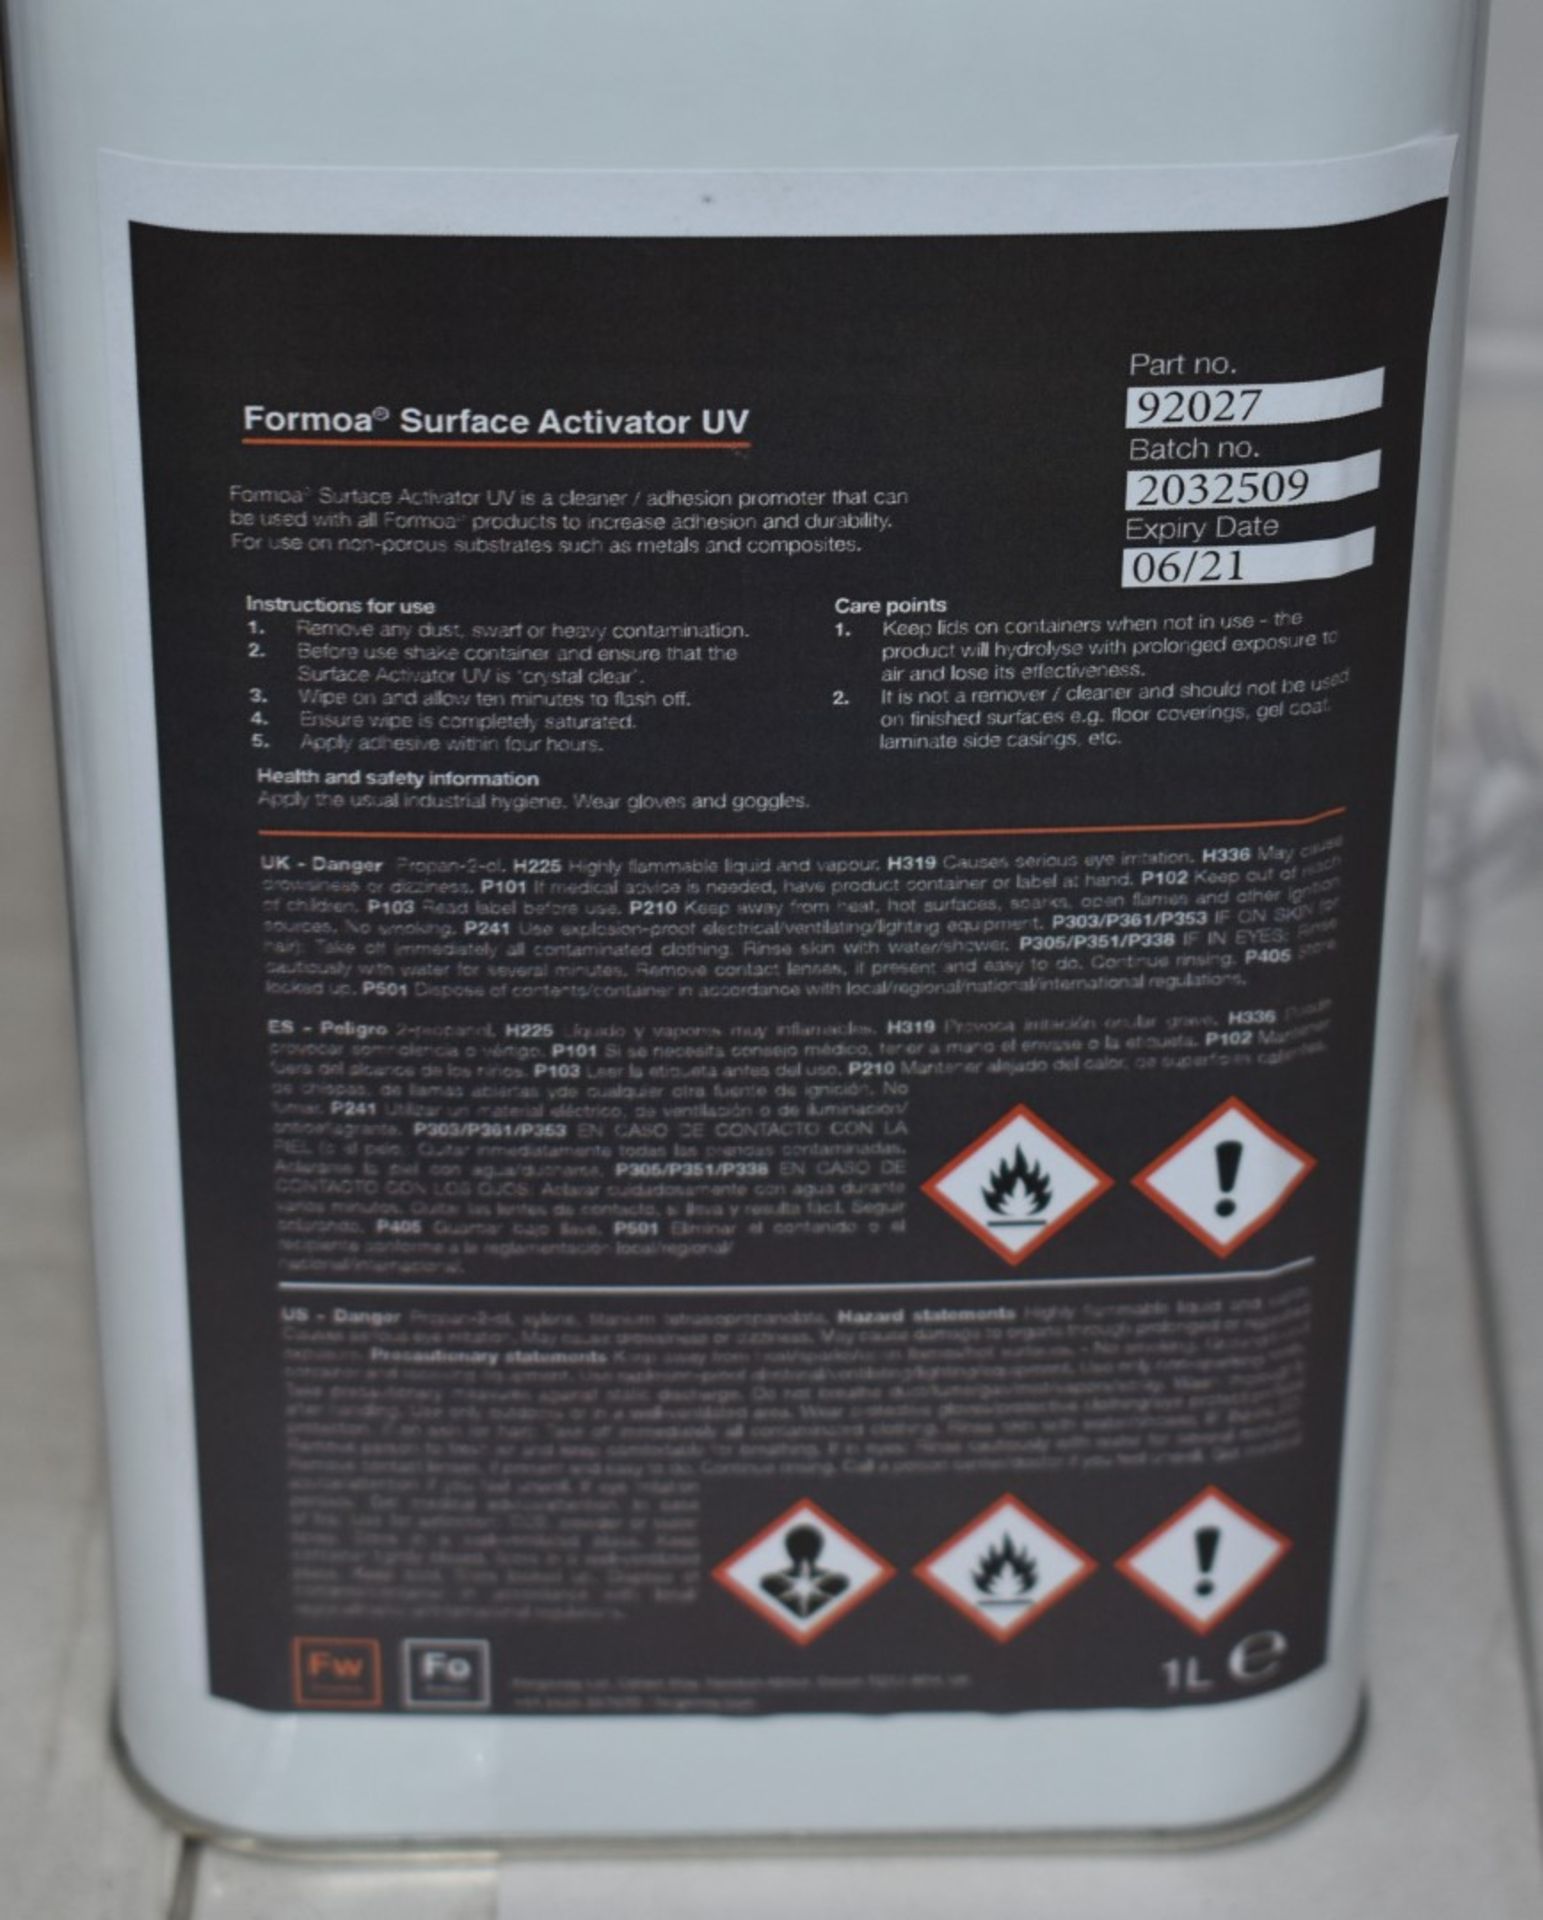 12 x Forgeway Formoa Surface Activator 1 Litre Containers - Adhesion Promotor, Cleaner, Degreaser - Image 7 of 7